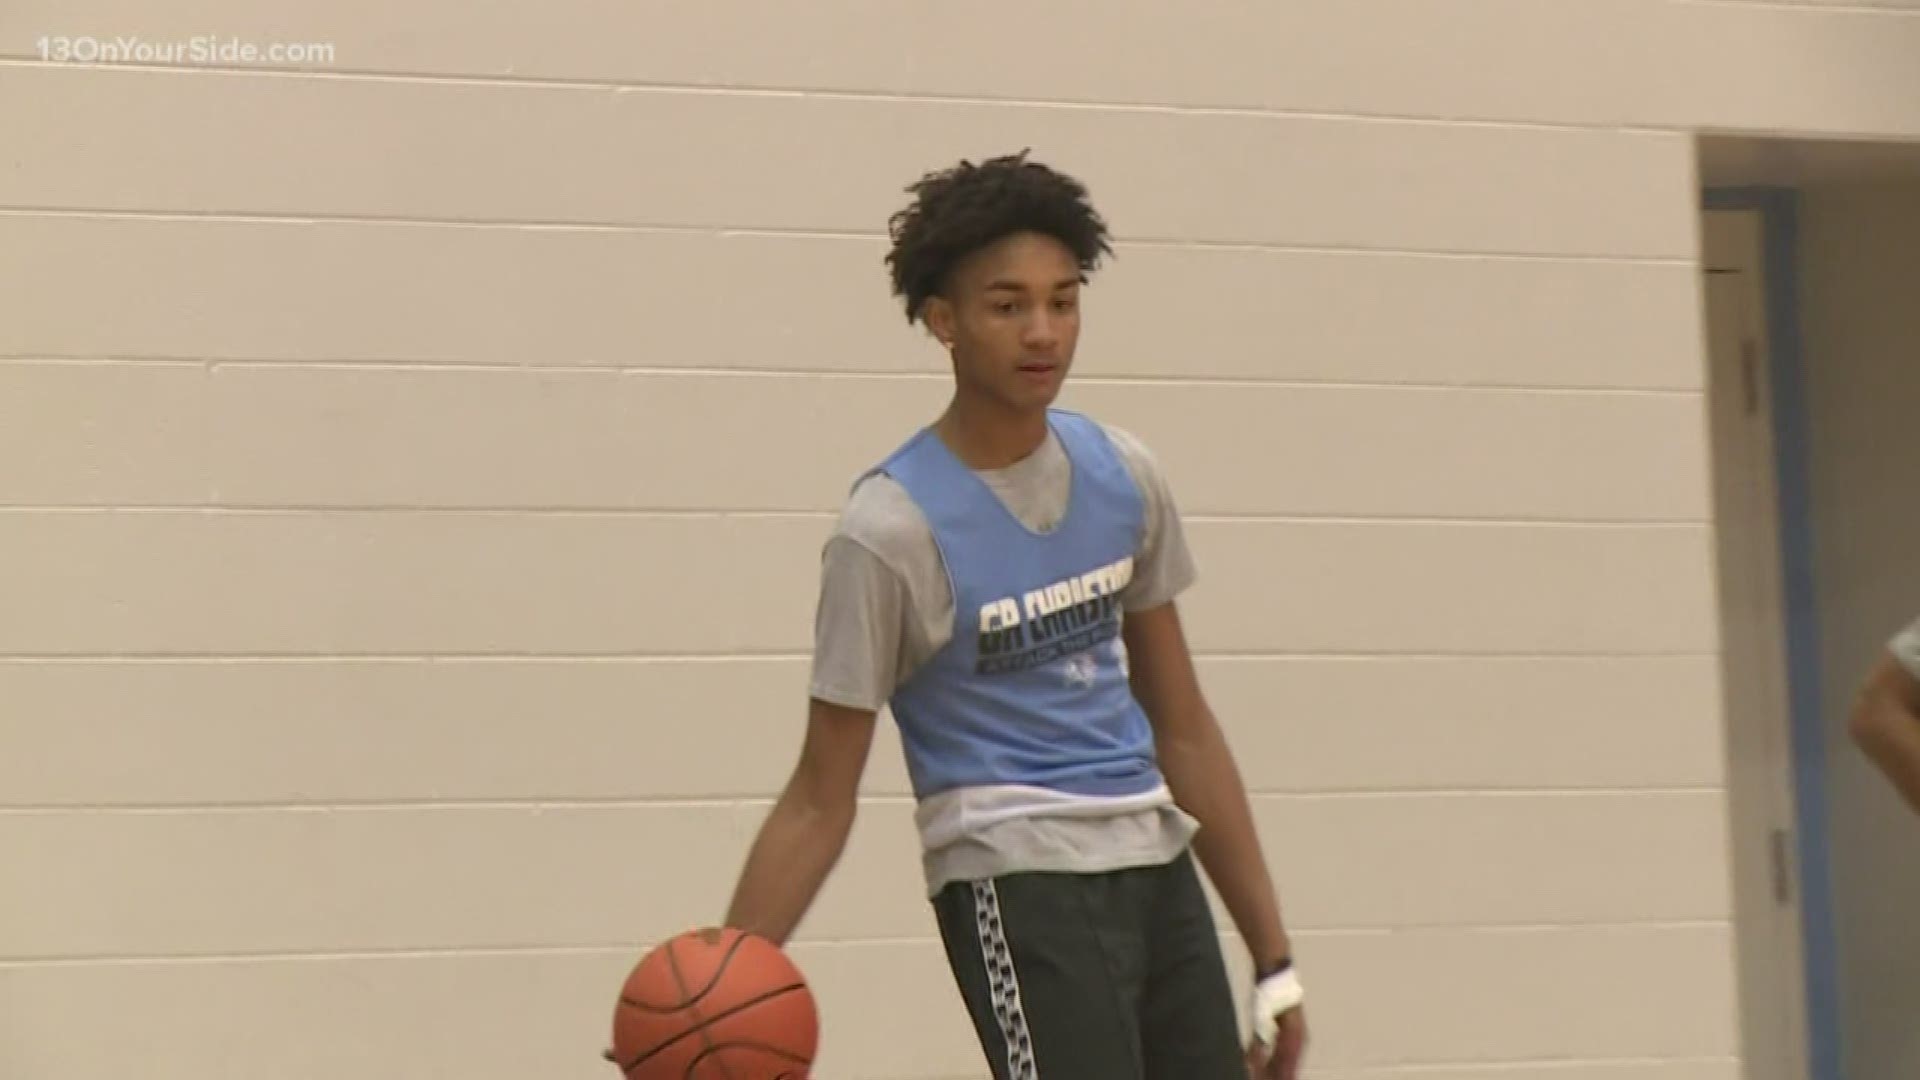 Grand Rapids Christian basketball player Kobe Bufkin is already making a name for himself on the court.